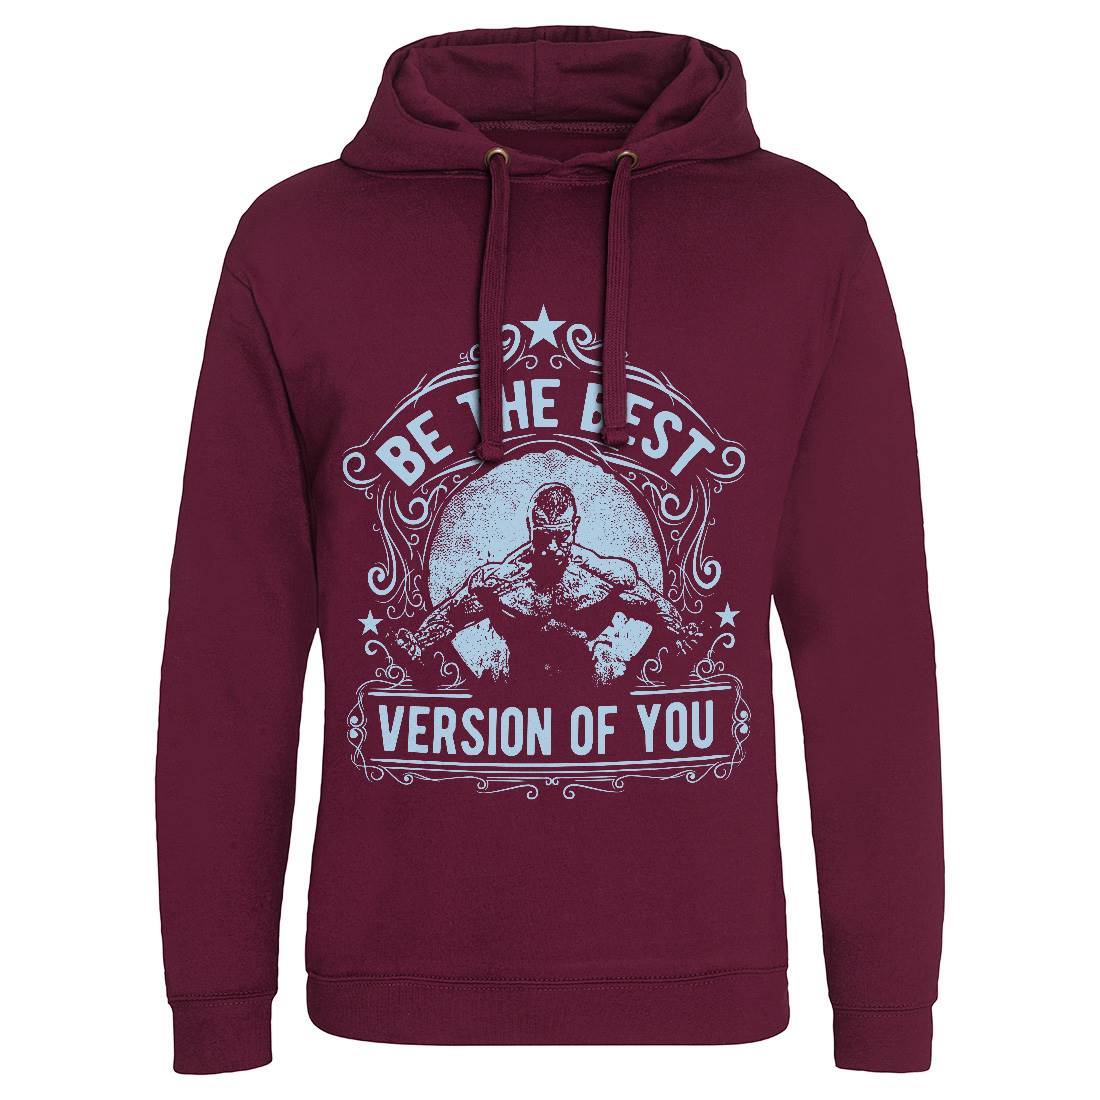 The Best Version Of You Mens Hoodie Without Pocket Gym C985